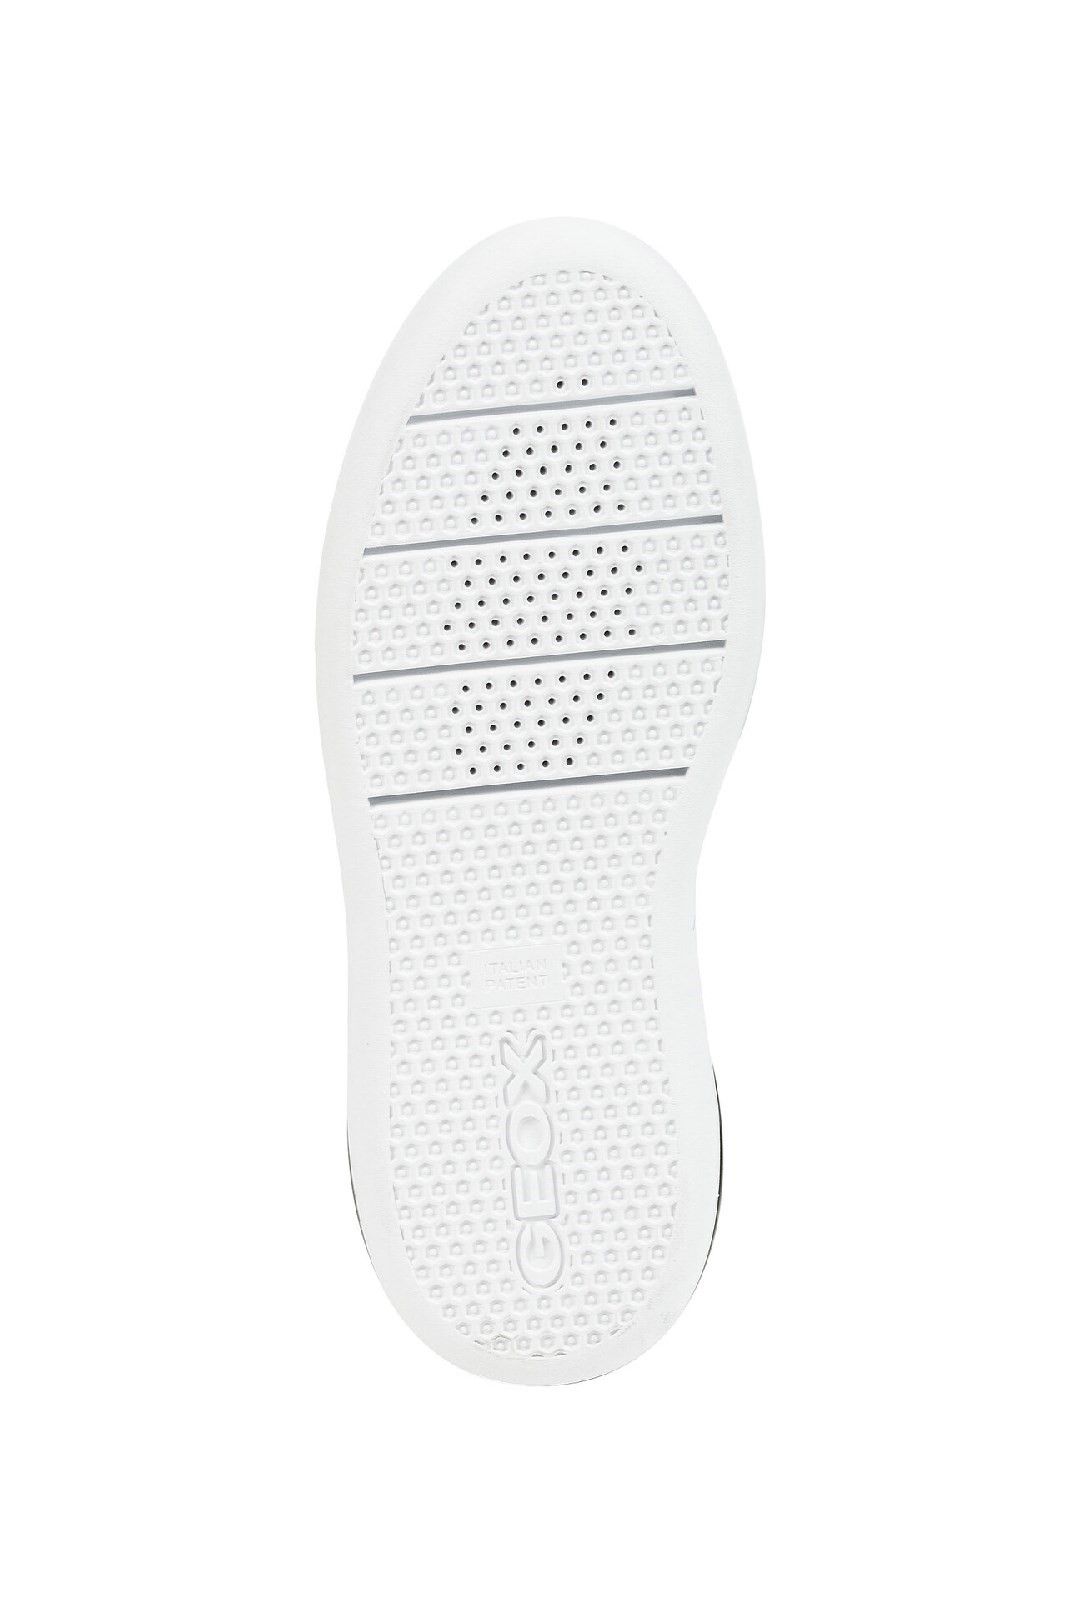 Exclusive patent. The combination of the perforated sole and resistant breathable and waterproof membrane allow for natural temperature regulation, creating the perfect micro-climate inside the shoe.It keeps feet dry and comfortable for the whole dayExclusive Patent. 
Perforated footbed. 
Resistant outsole.